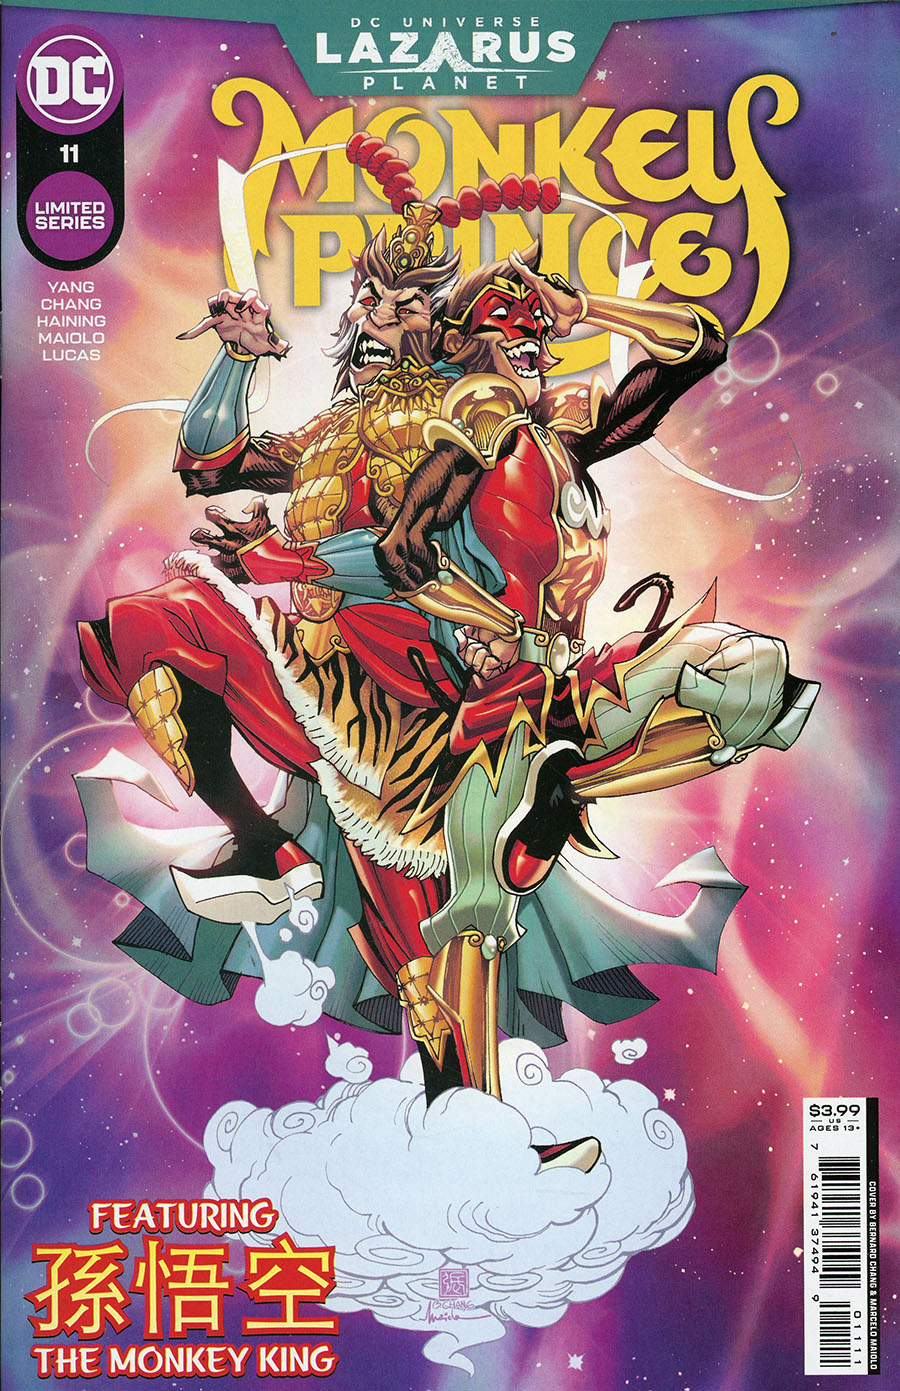 Monkey Prince #11 Cover A Regular Bernard Chang Cover (Lazarus Planet Tie-In) (Limit 1 Per Customer)